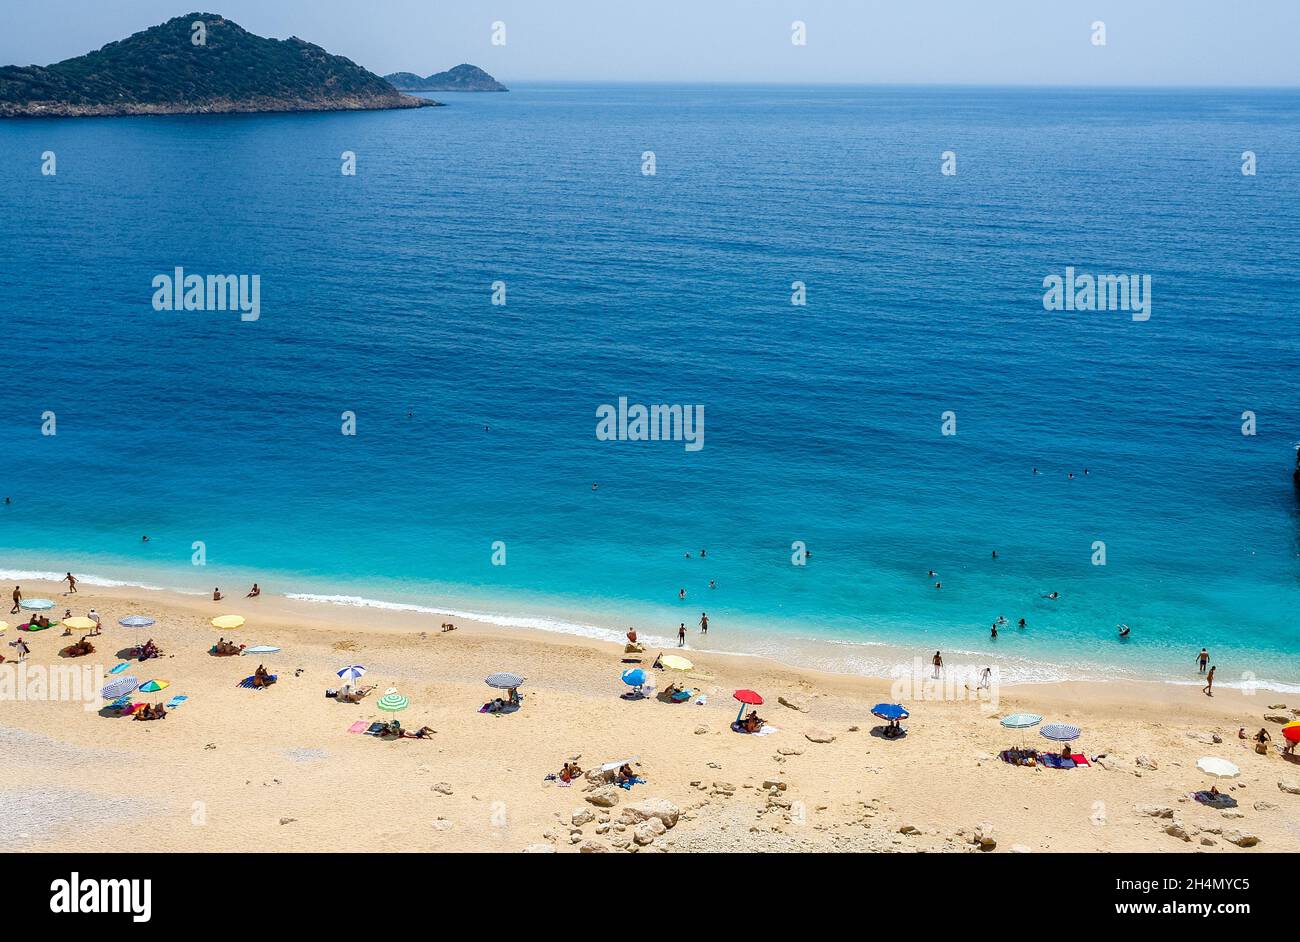 Kaputas beach near Kalkan town in Antalya province of Turkey. View with unidentifiable figures of people. Stock Photo